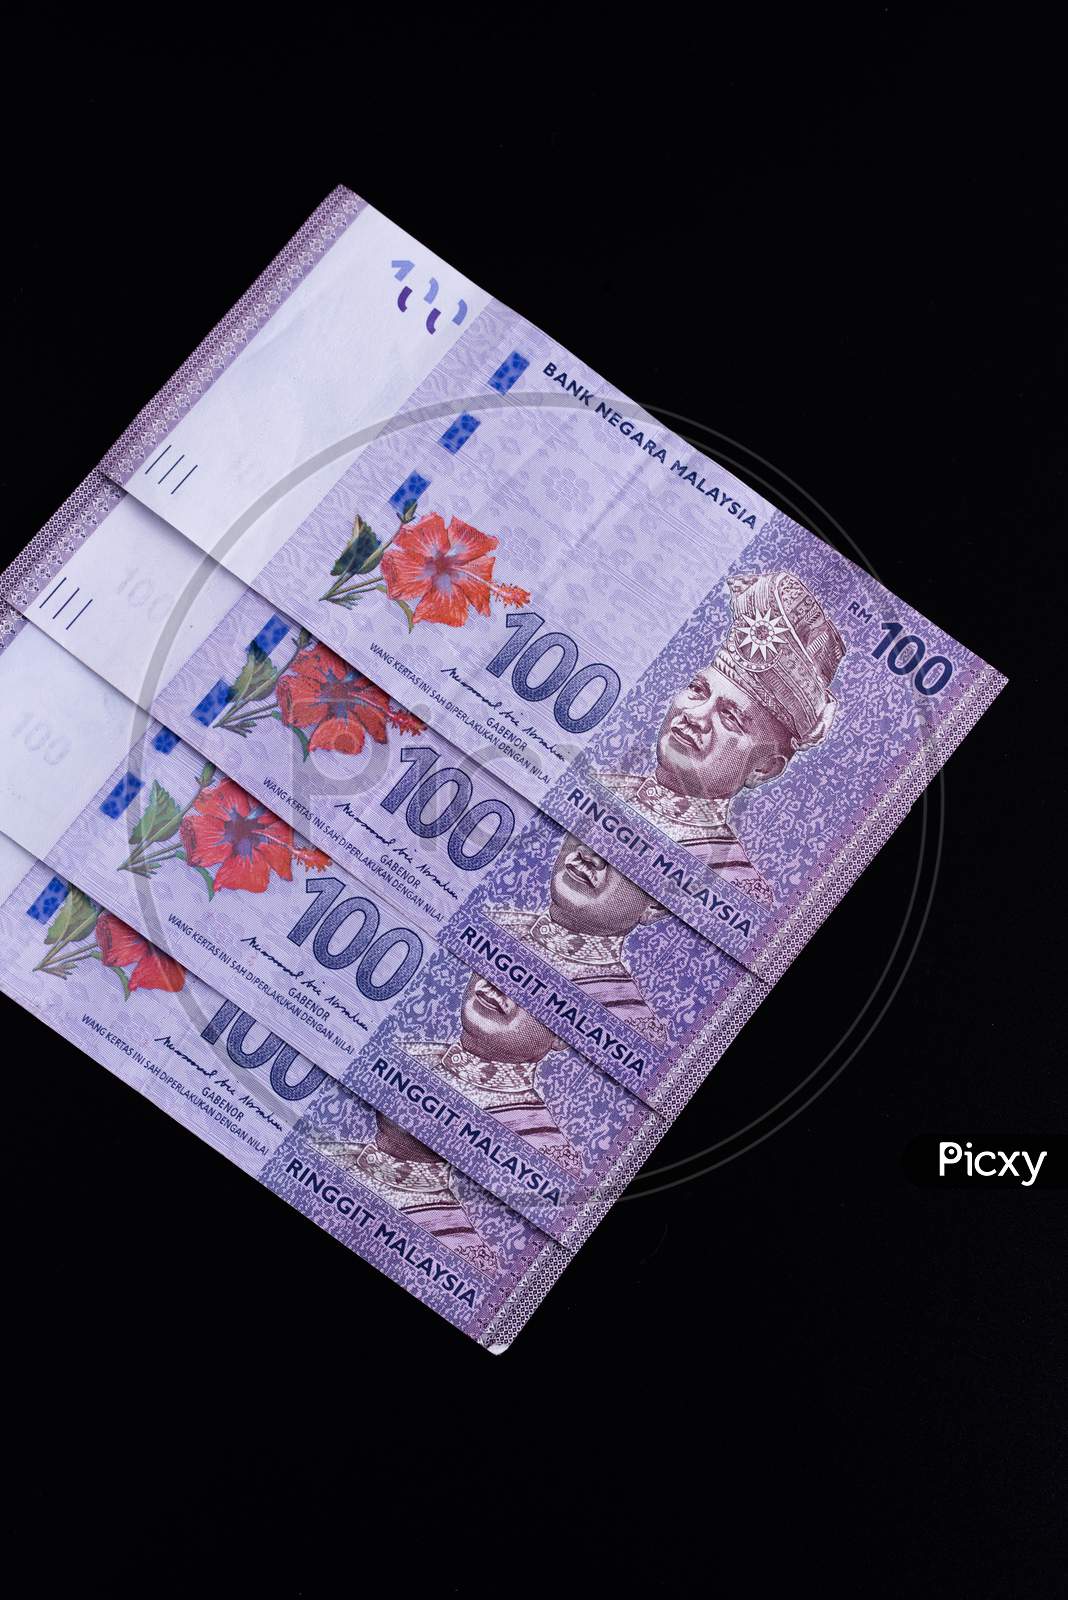 Malaysia Currency Of Malaysian Ringgit Banknotes Background. Paper Money Of Hundred Ringgit Notes On Etreme Closeup. Financial Concept.